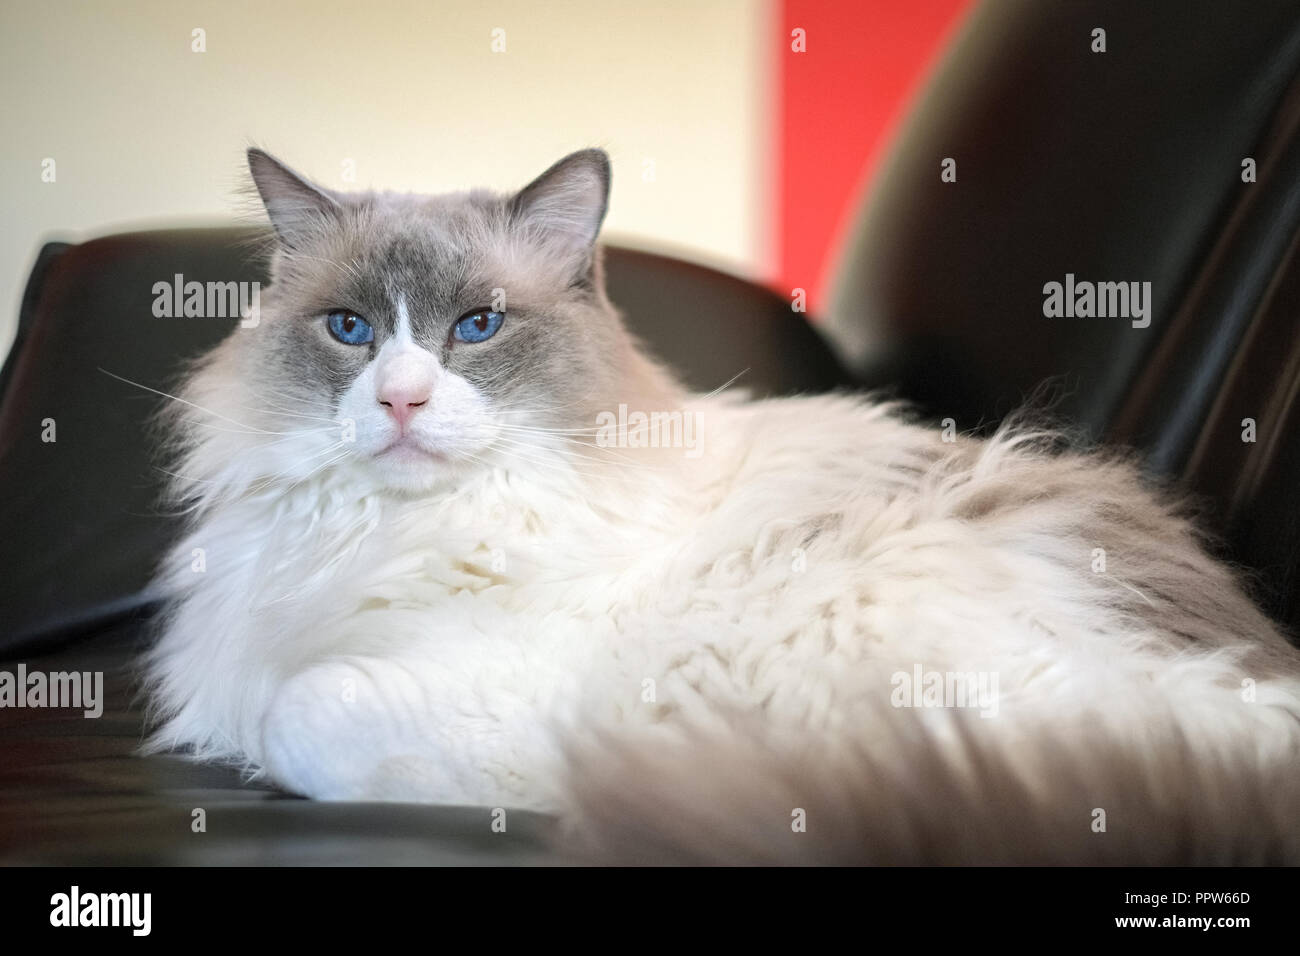 Ragdoll cats are best known for its docile temperament and affectionate nature. The name is derived from the tendency to go limp when picked up. Stock Photo